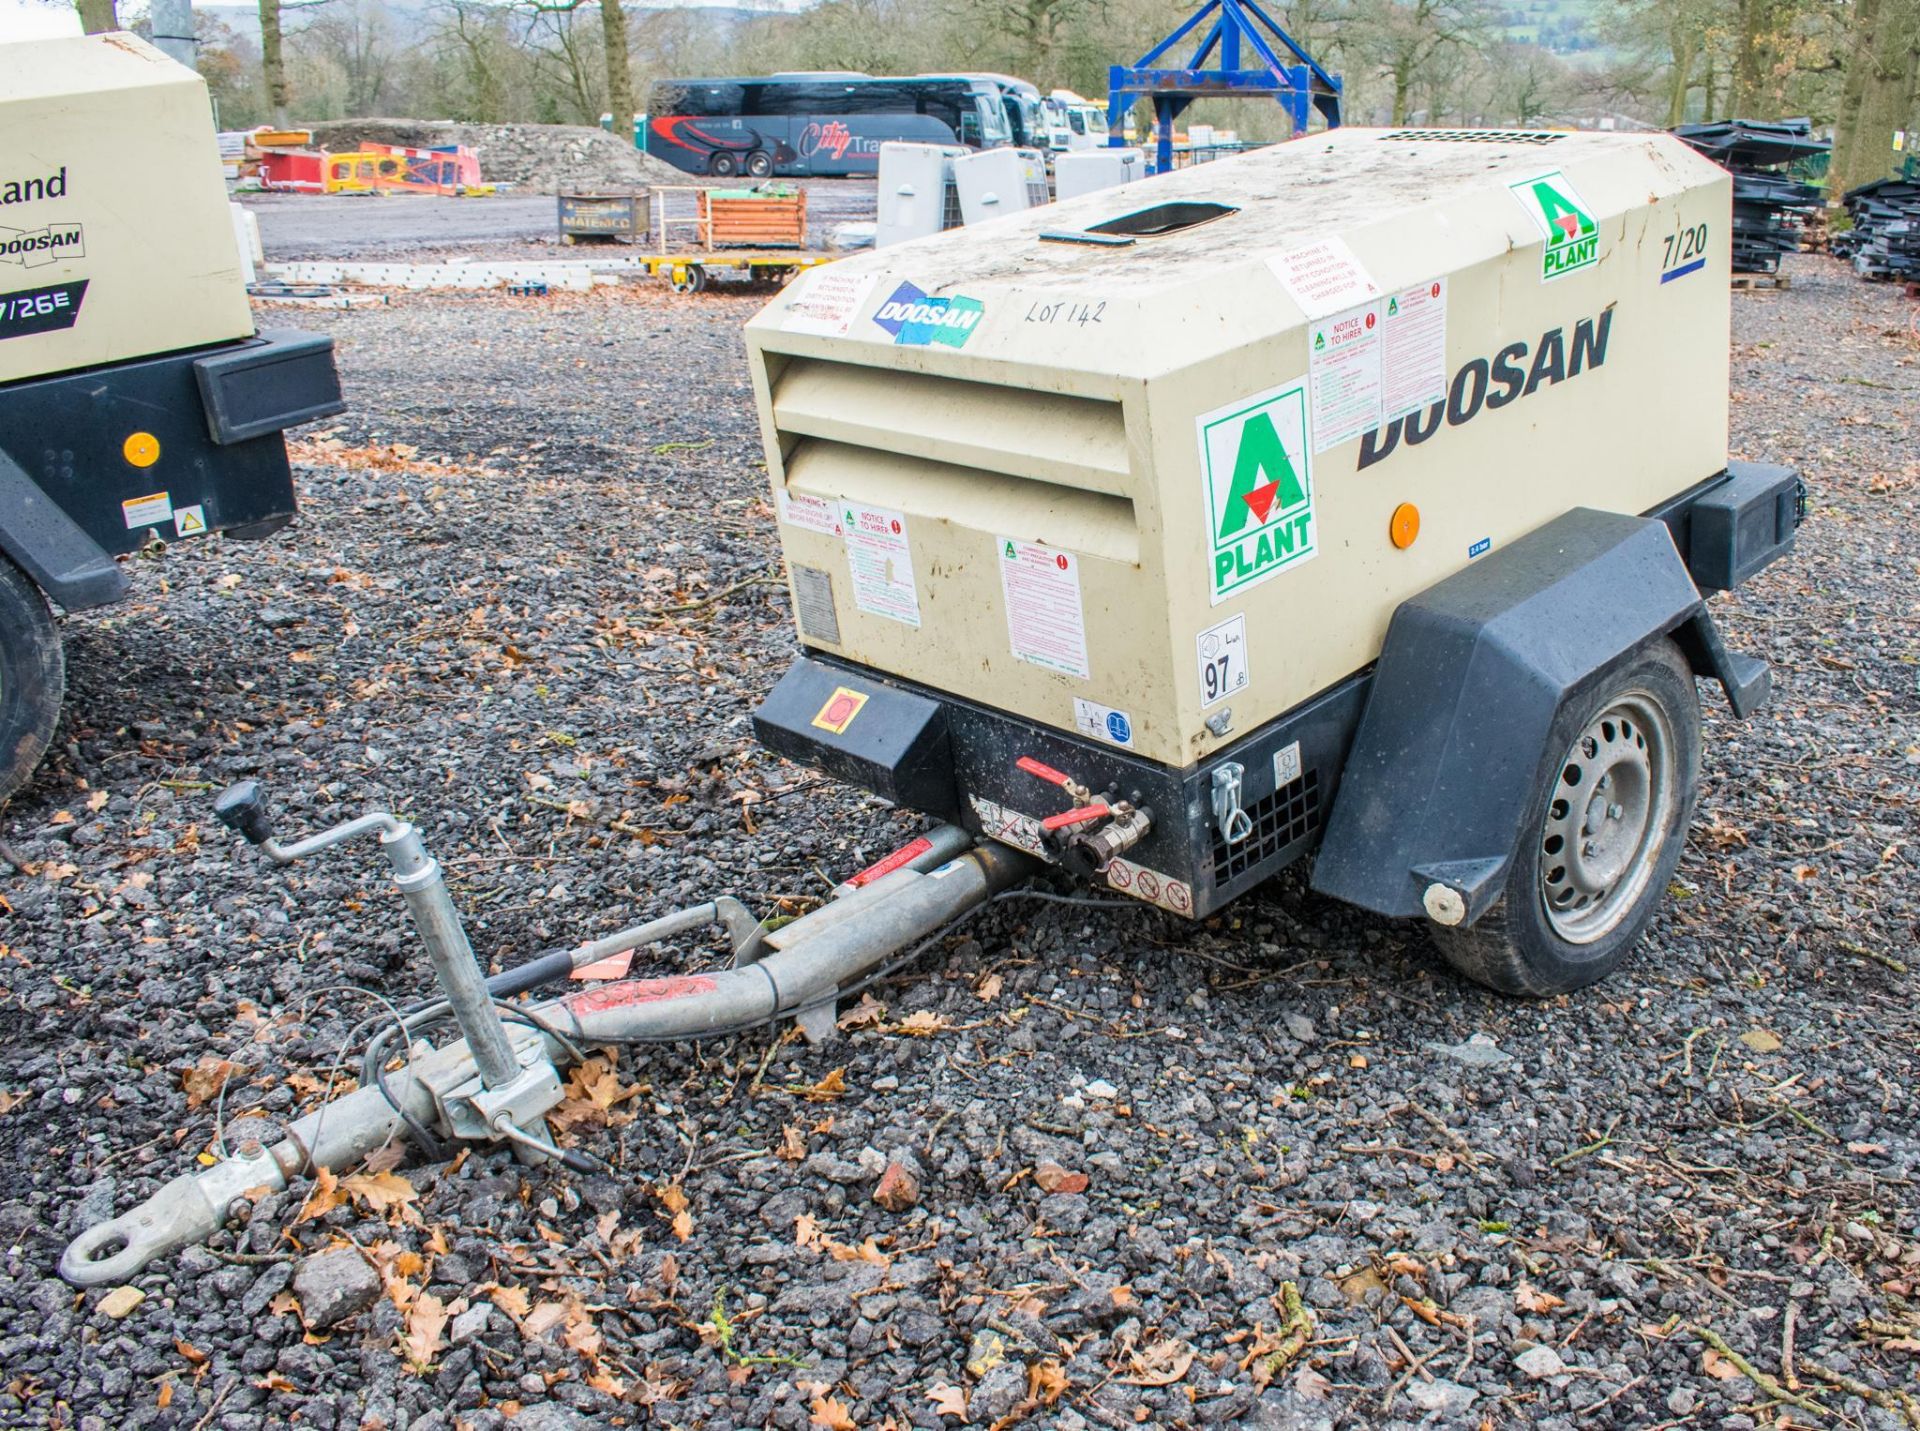 Doosan 7/20 diesel driven fast tow mobile air compressor Year: 2015 S/N: 124112 Recorded Hours: